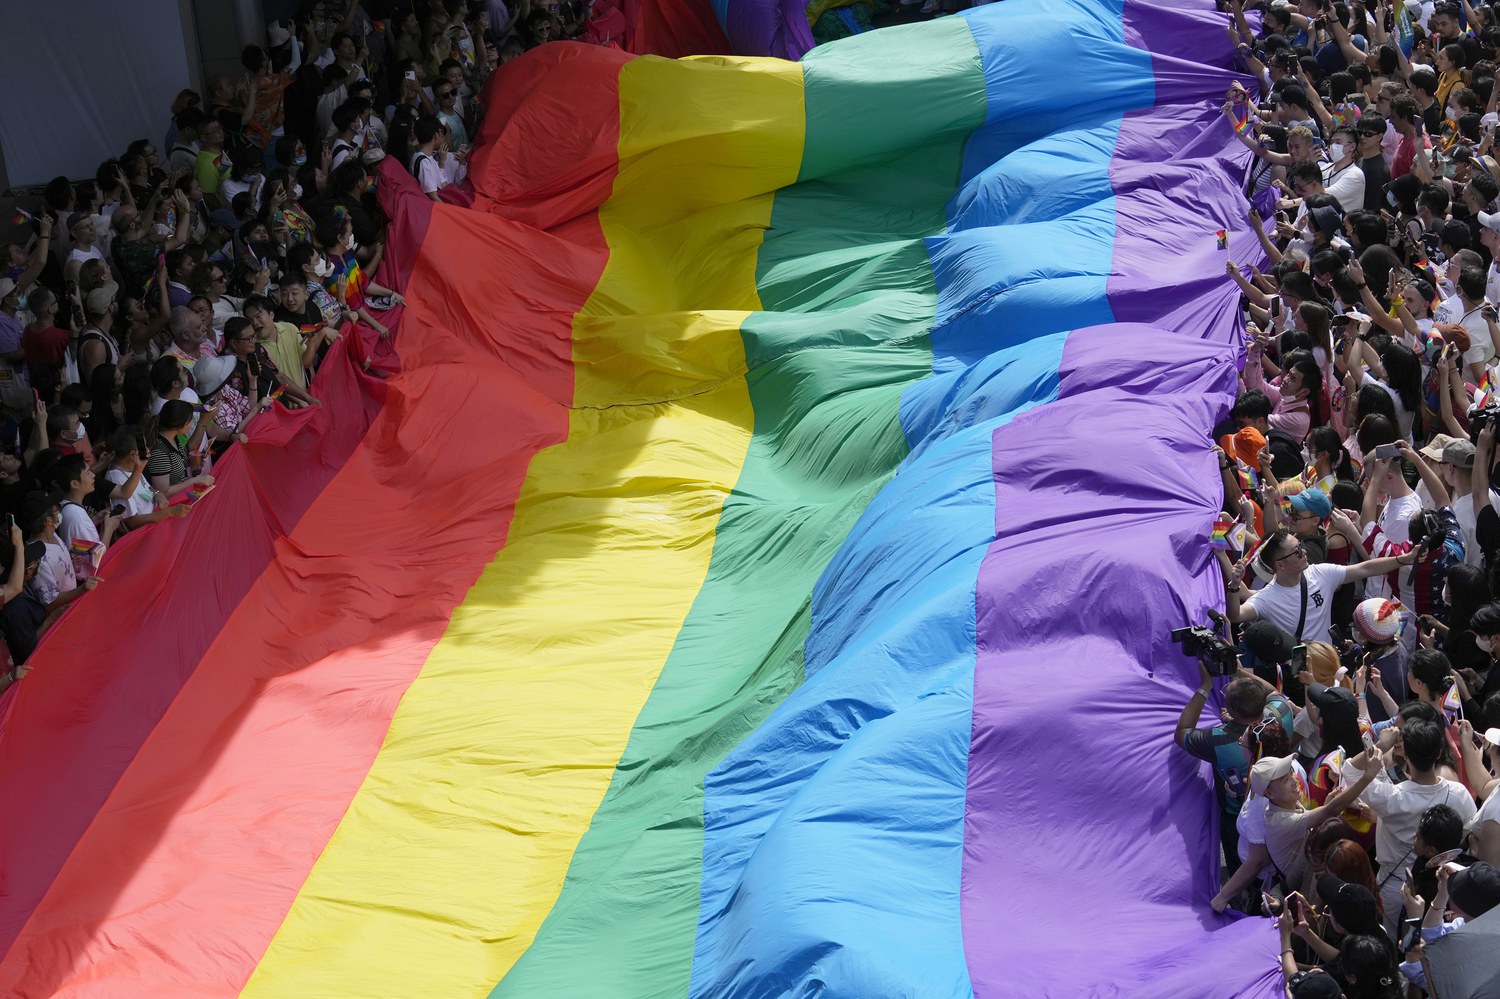 Thailand becomes first Southeast Asian country to approve same-sex marriage bill